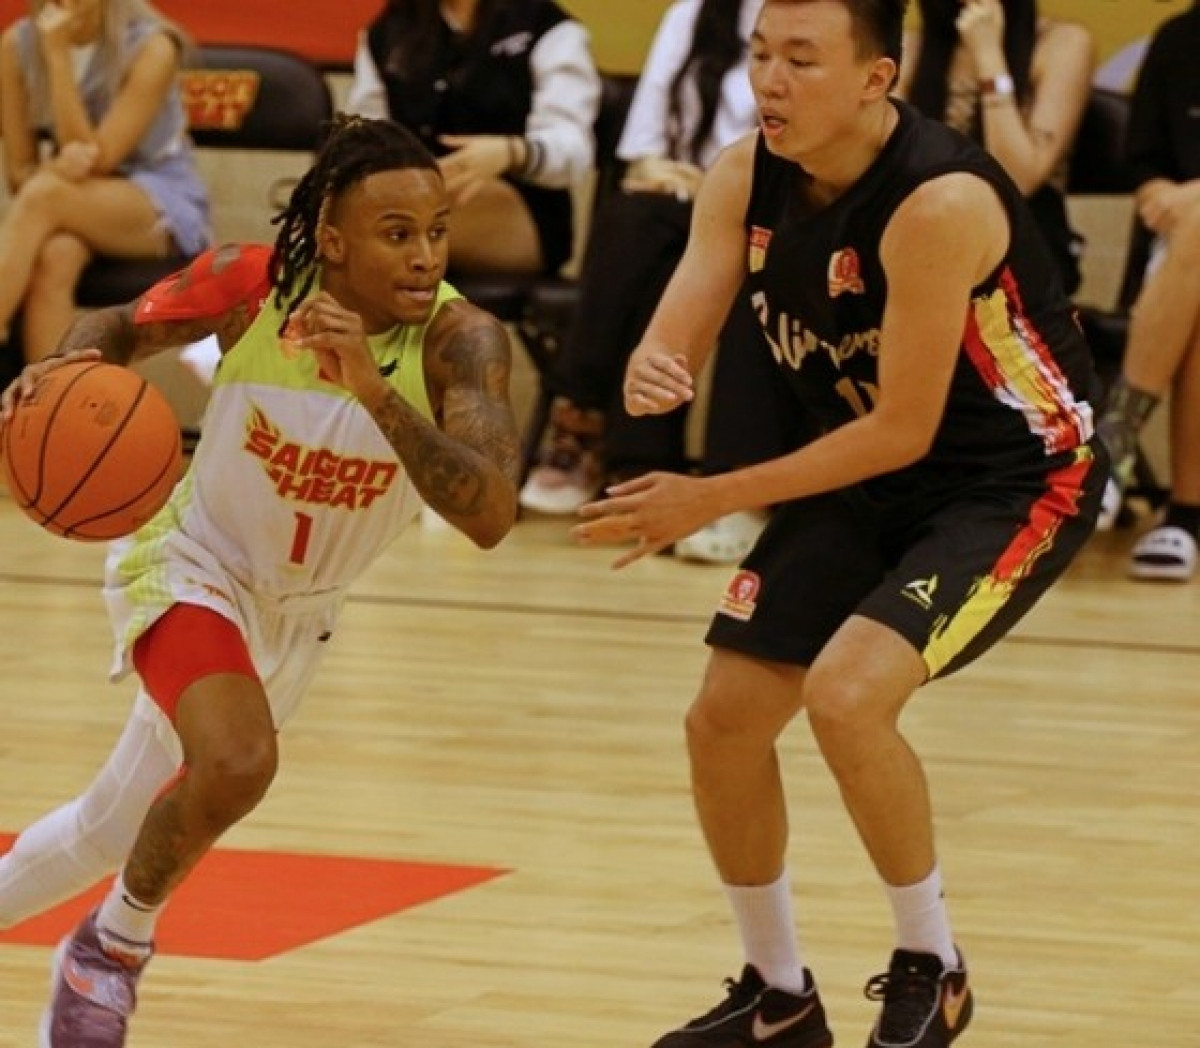 saigon heat make asean basketball league finals for first time picture 1